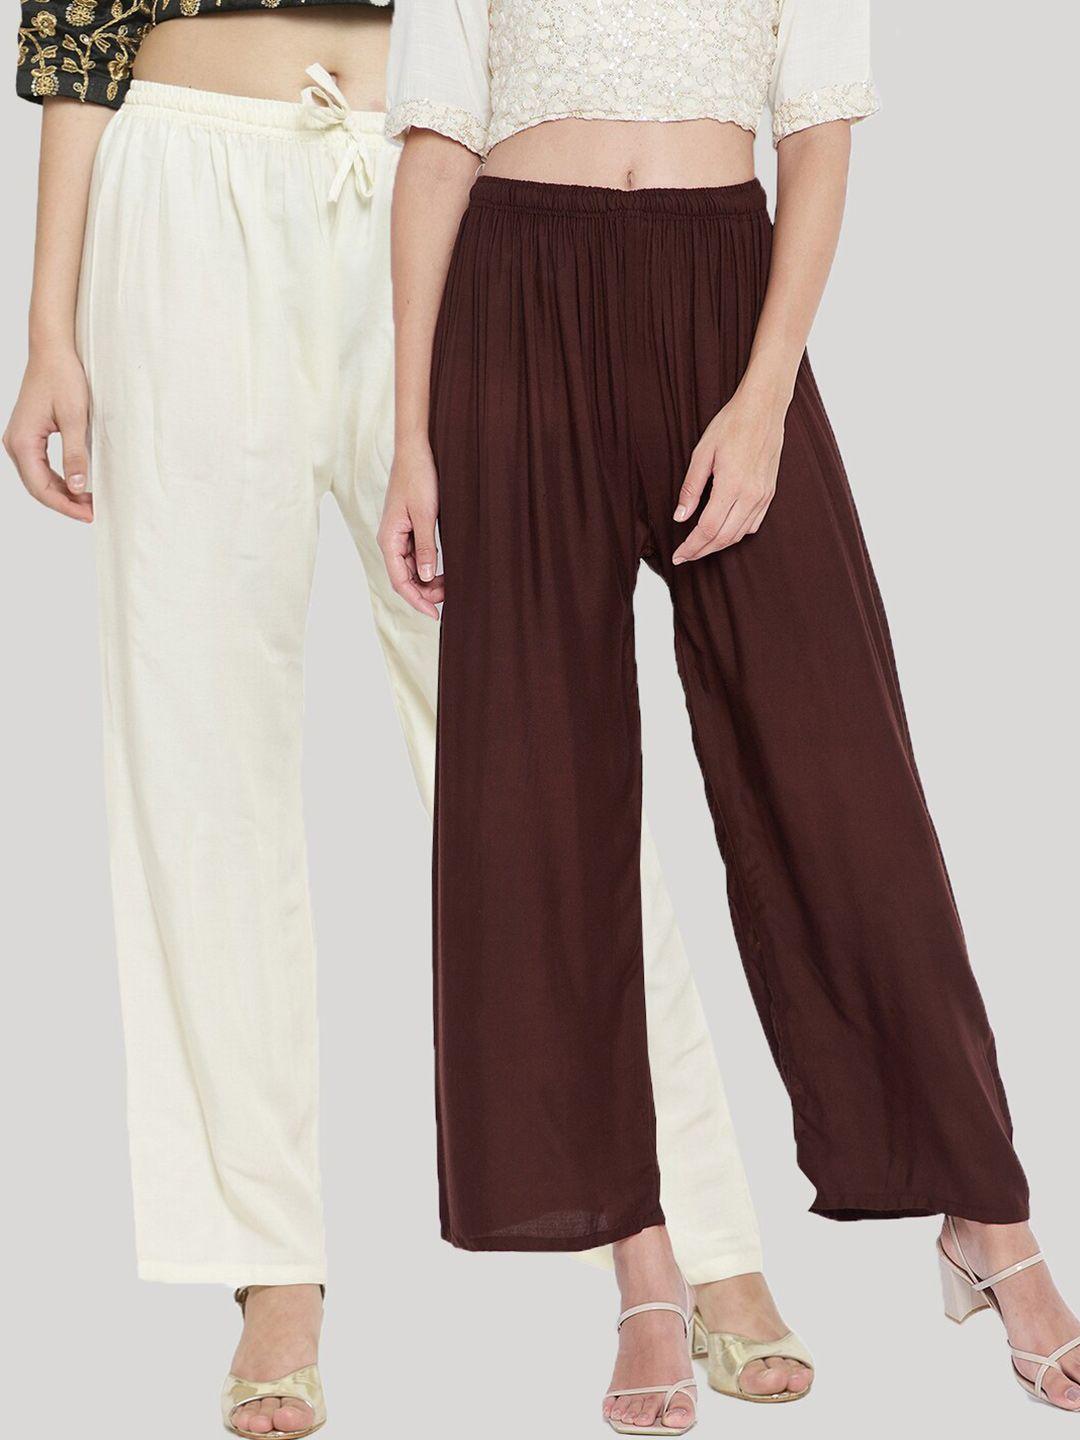 clora creation women off white & brown pack of 2 flared ethnic palazzos